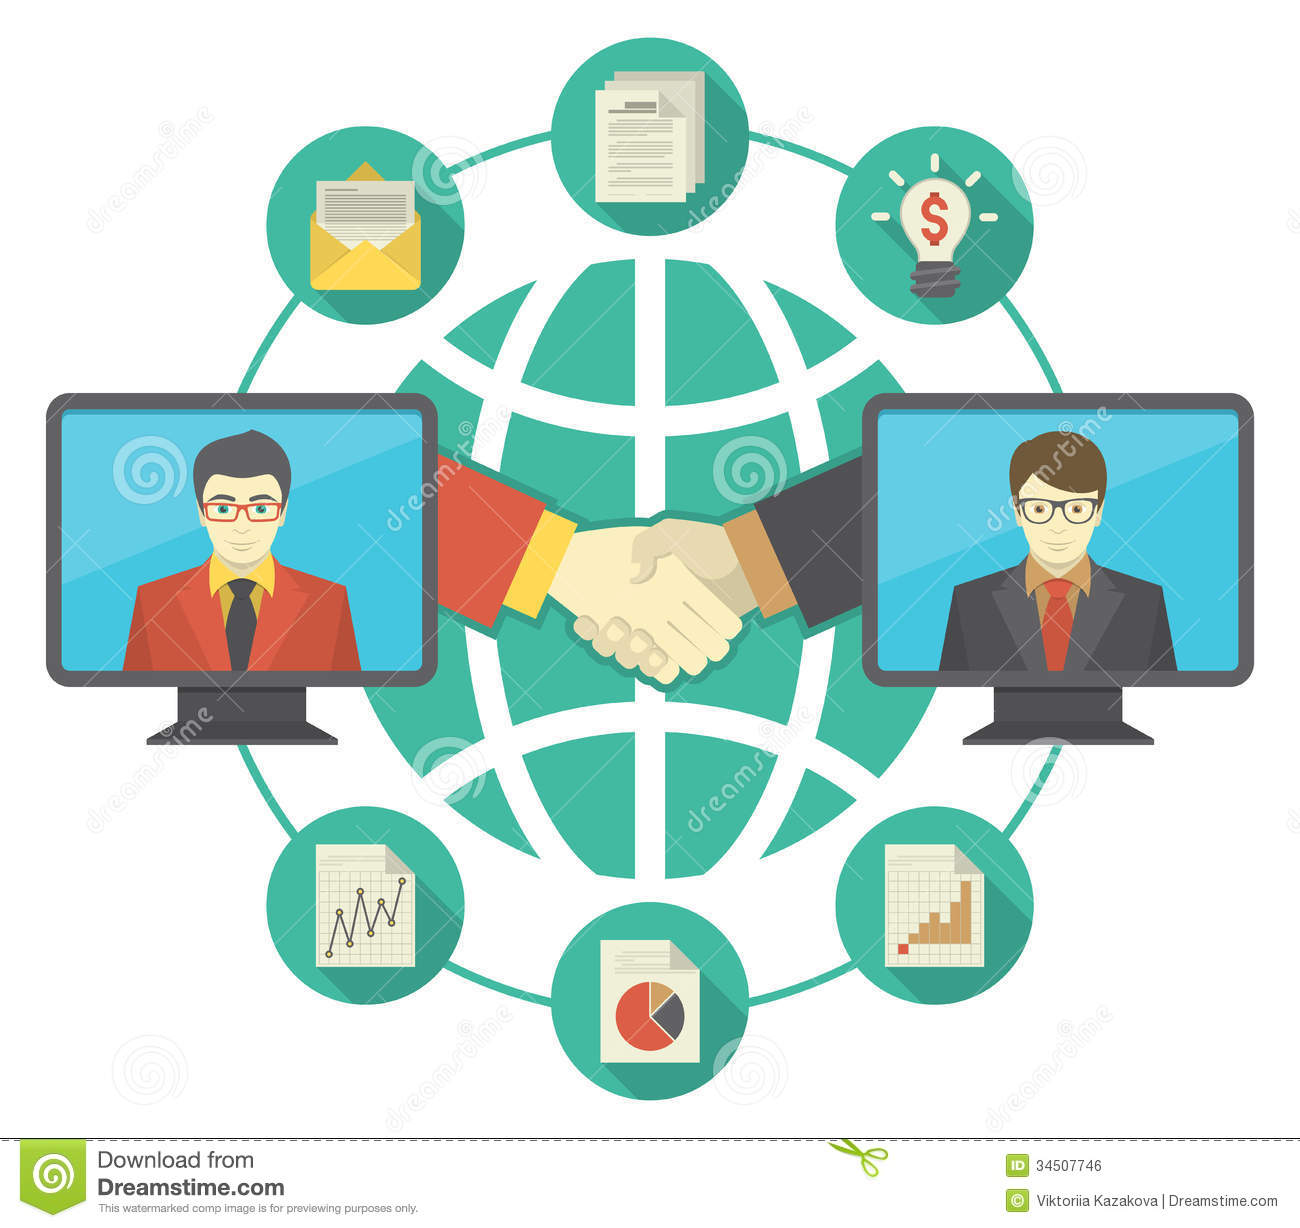 Of Business Cooperation With The New Information Sharing Technologies